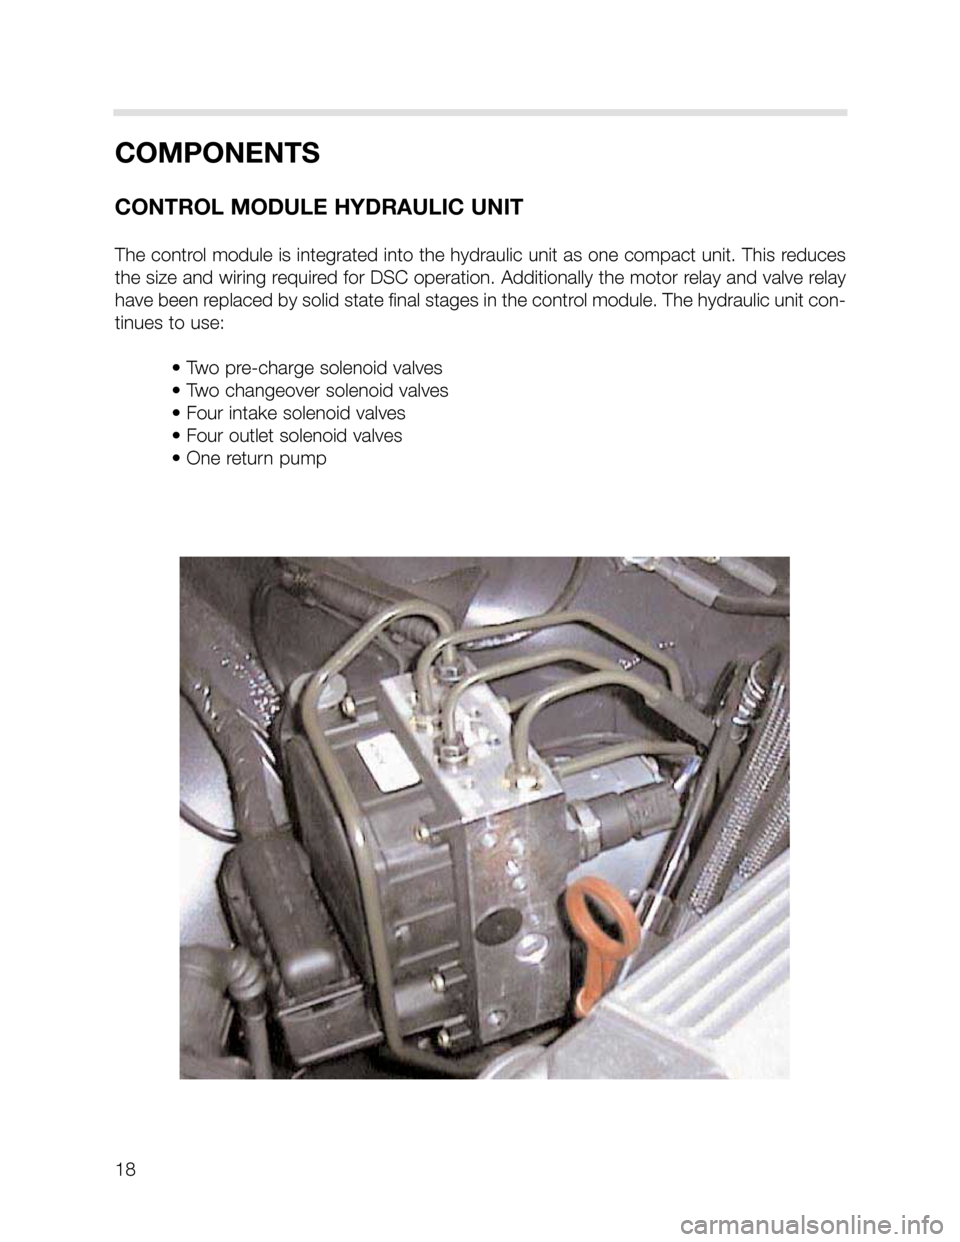 BMW X5 2006 E53 DSC System User Guide 18
COMPONENTS
CONTROL MODULE HYDRAULIC UNIT
The control module is integrated into the hydraulic unit as one compact unit. This reduces
the size and wiring required for DSC operation. Additionally the 